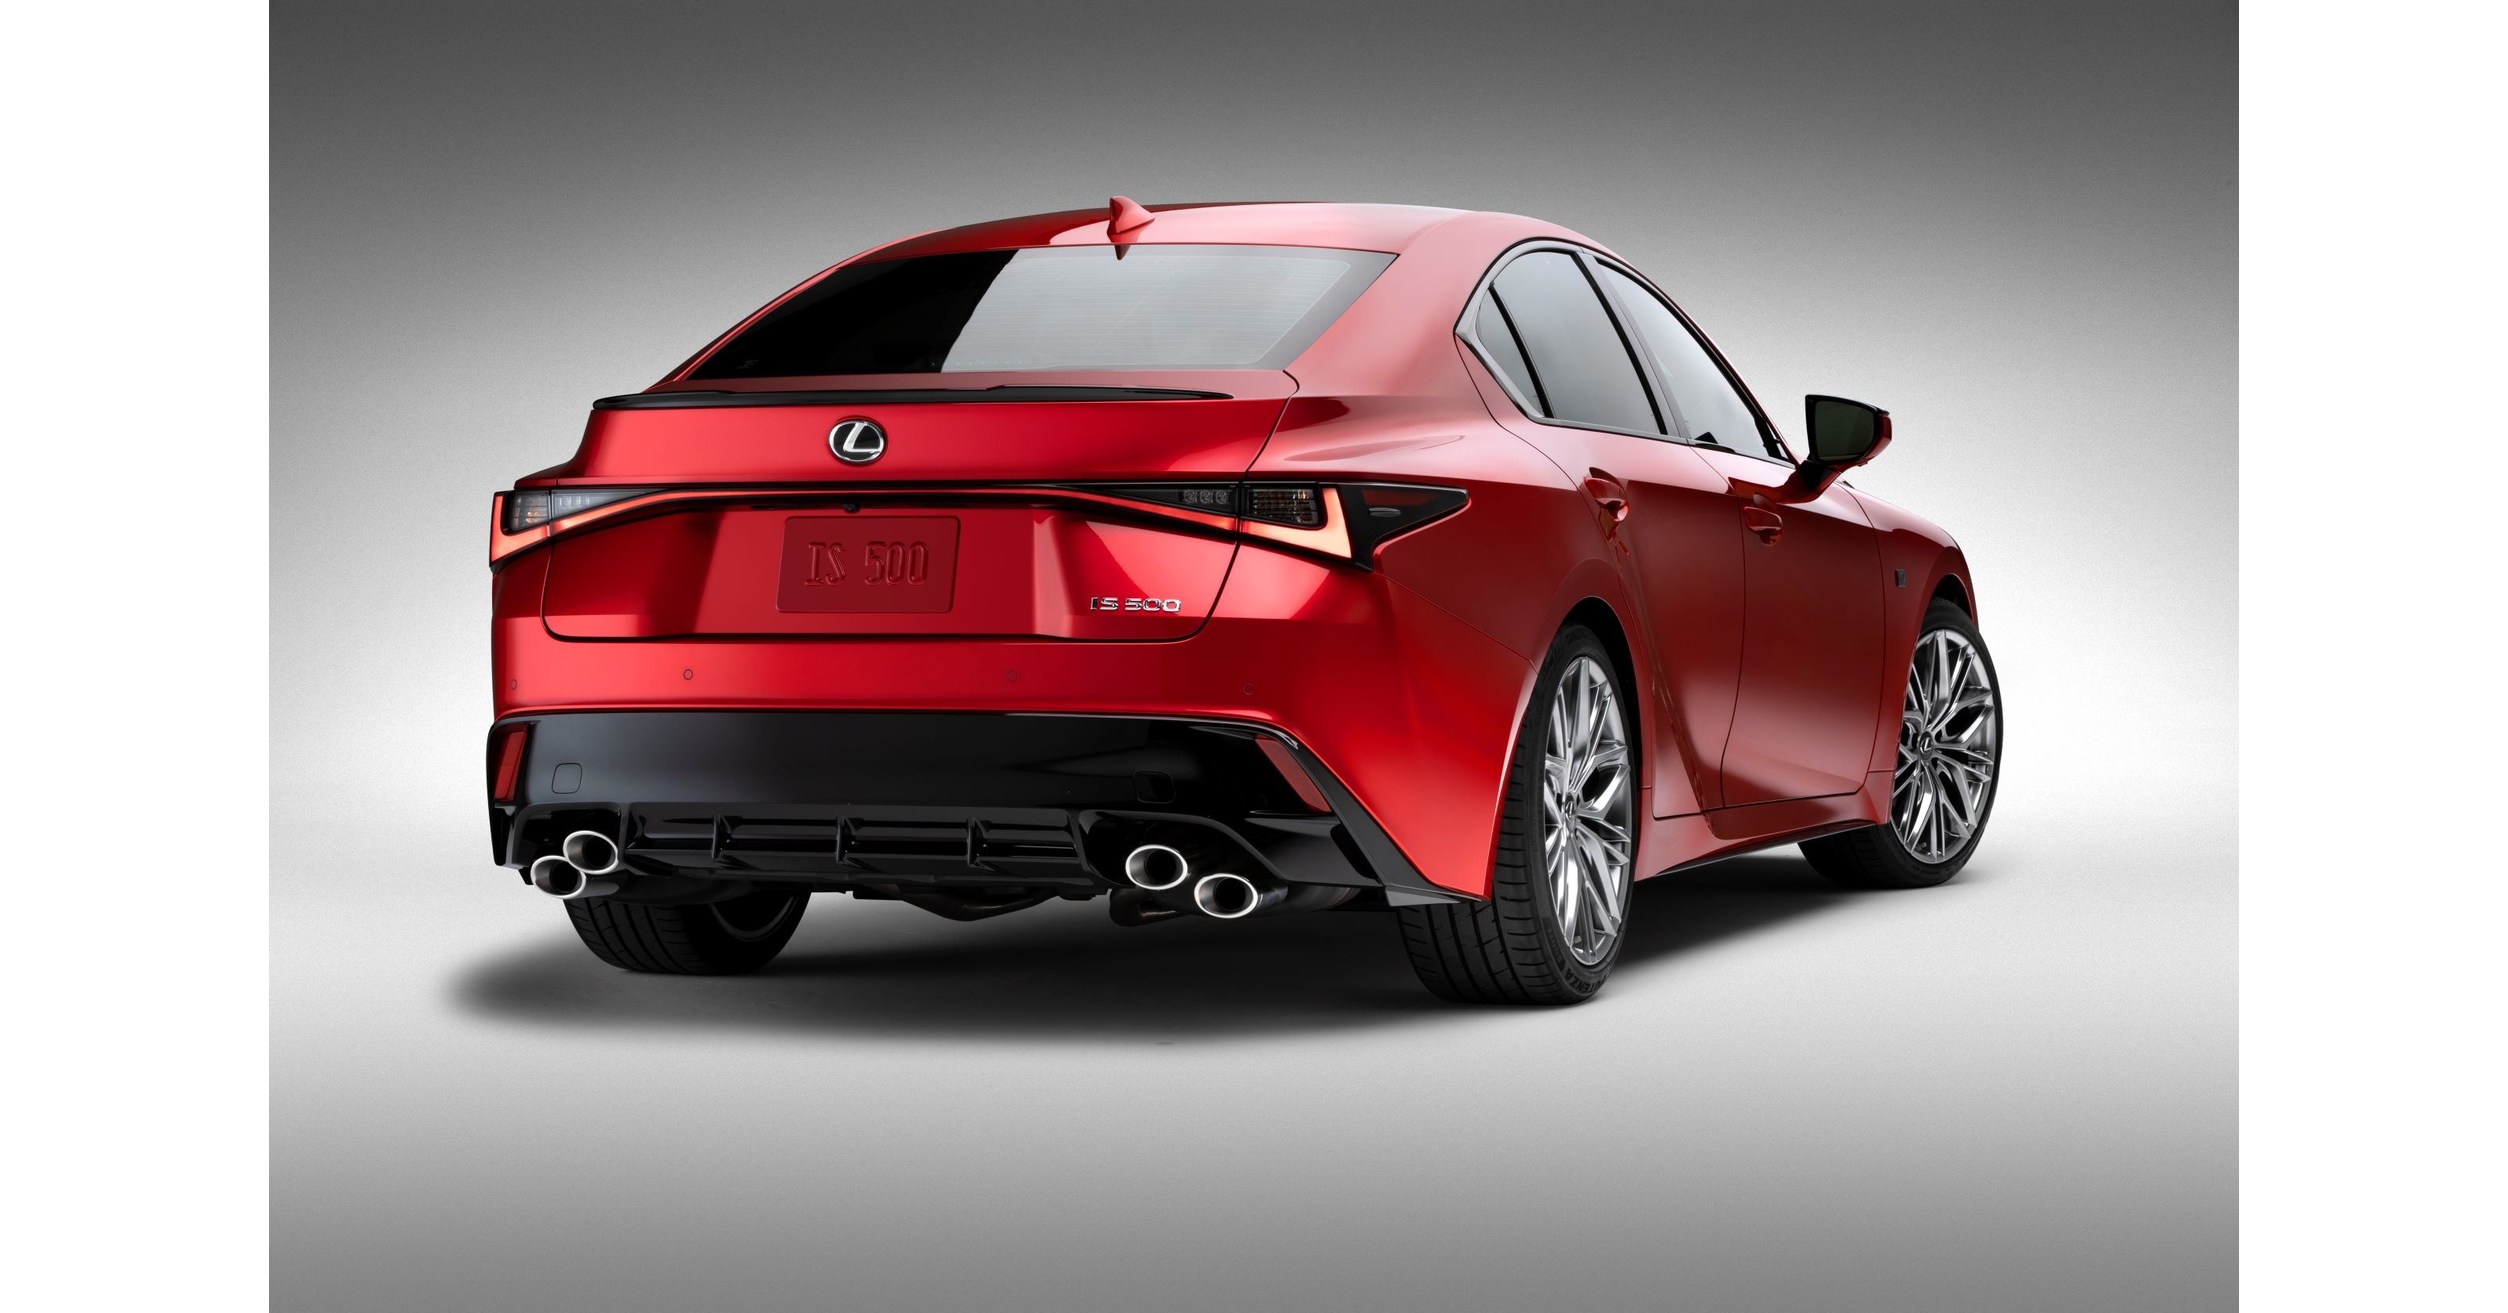 2022 Lexus IS 500: A New Breed of F SPORT Performance